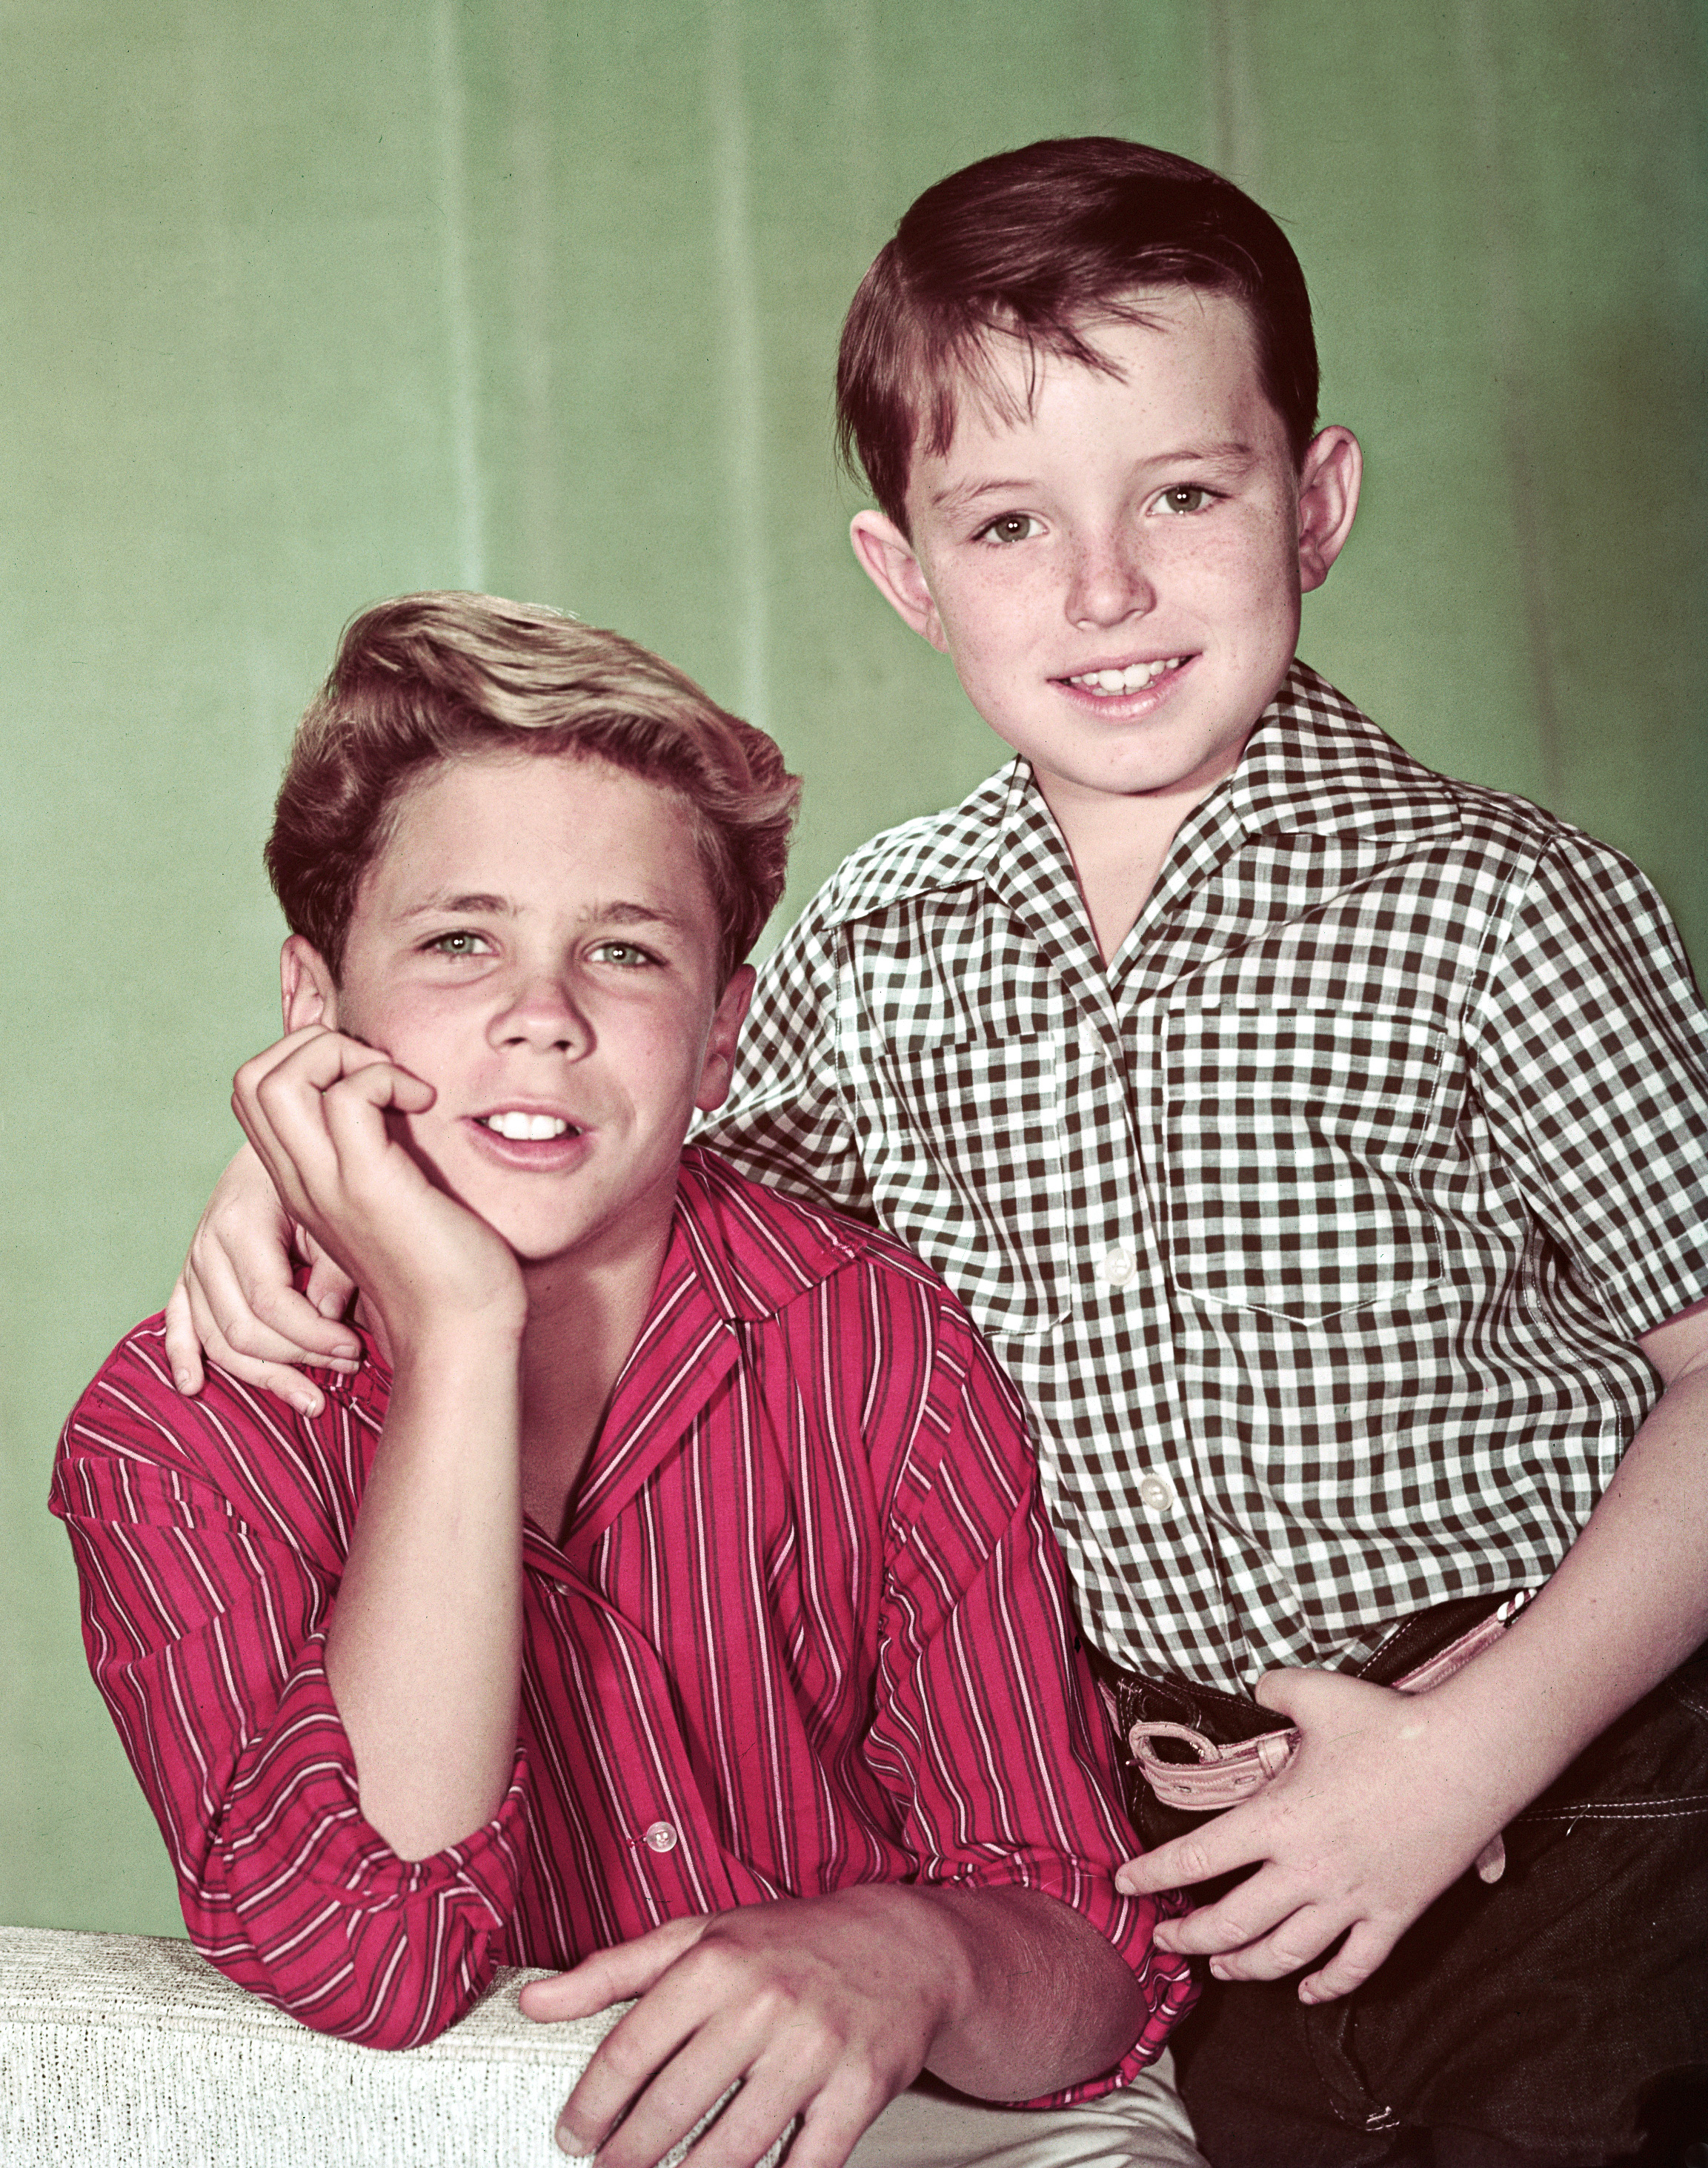 Tony Dow as Wally Cleaver and Jerry Mathers as Theodore "Beaver" Cleaver in "Leave It To Beaver" circa 1955 | Source: Getty Images